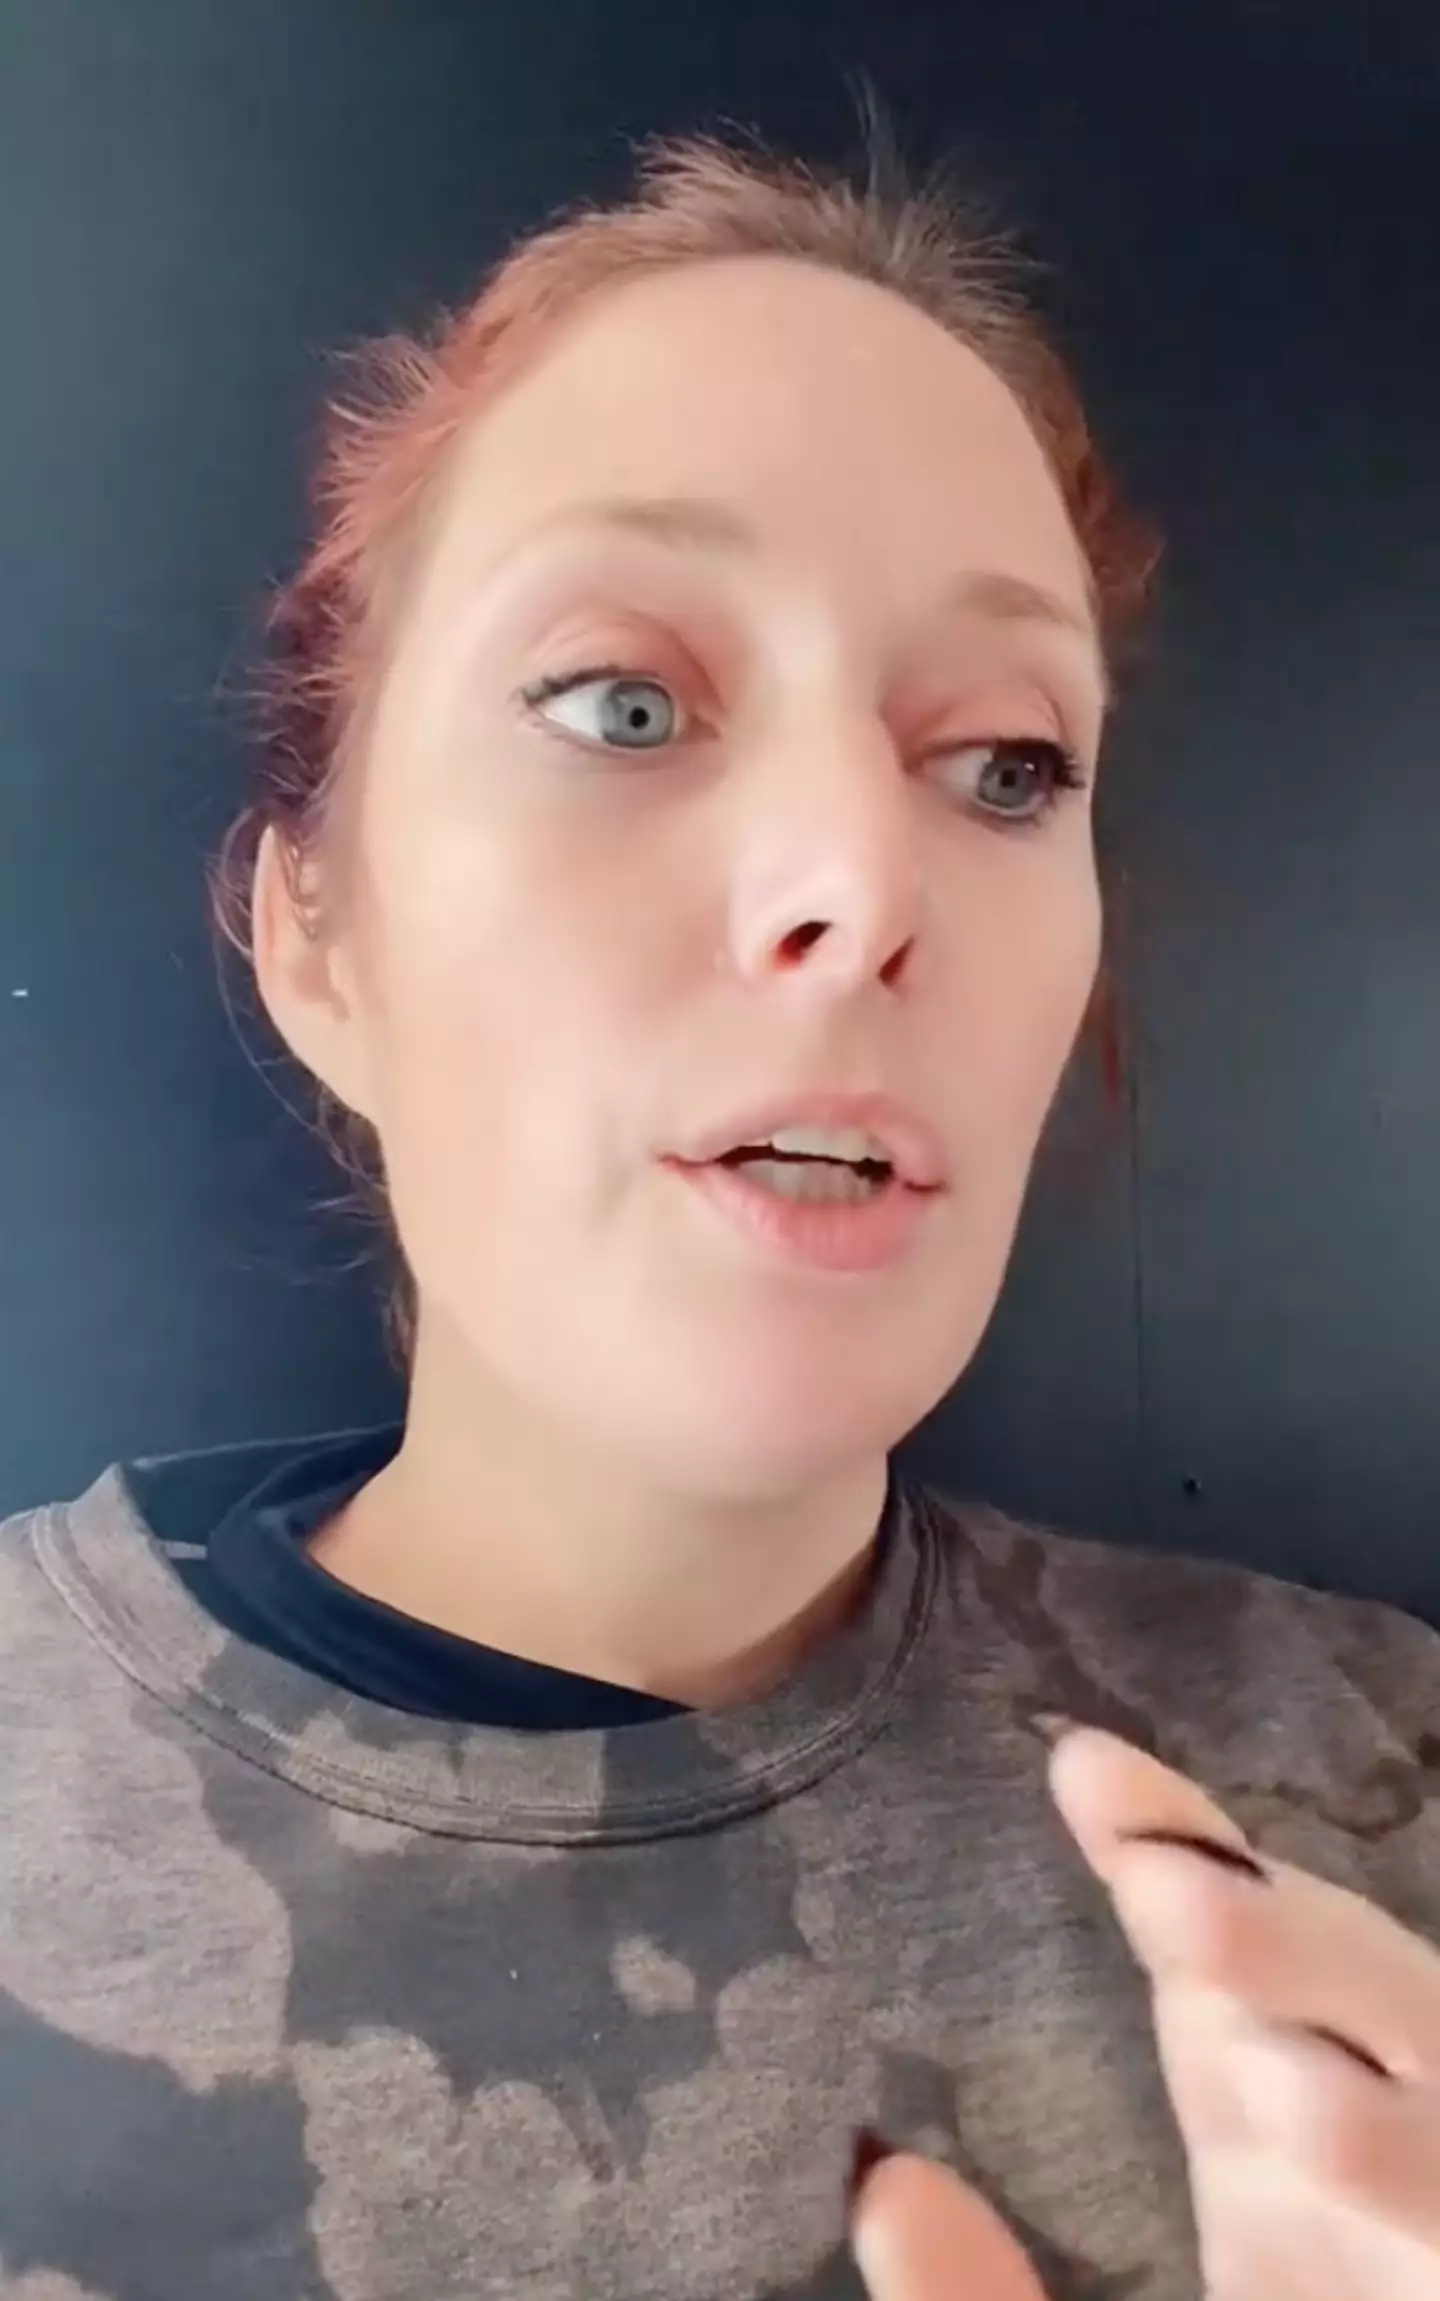 The woman opened up on her situation on TikTok.